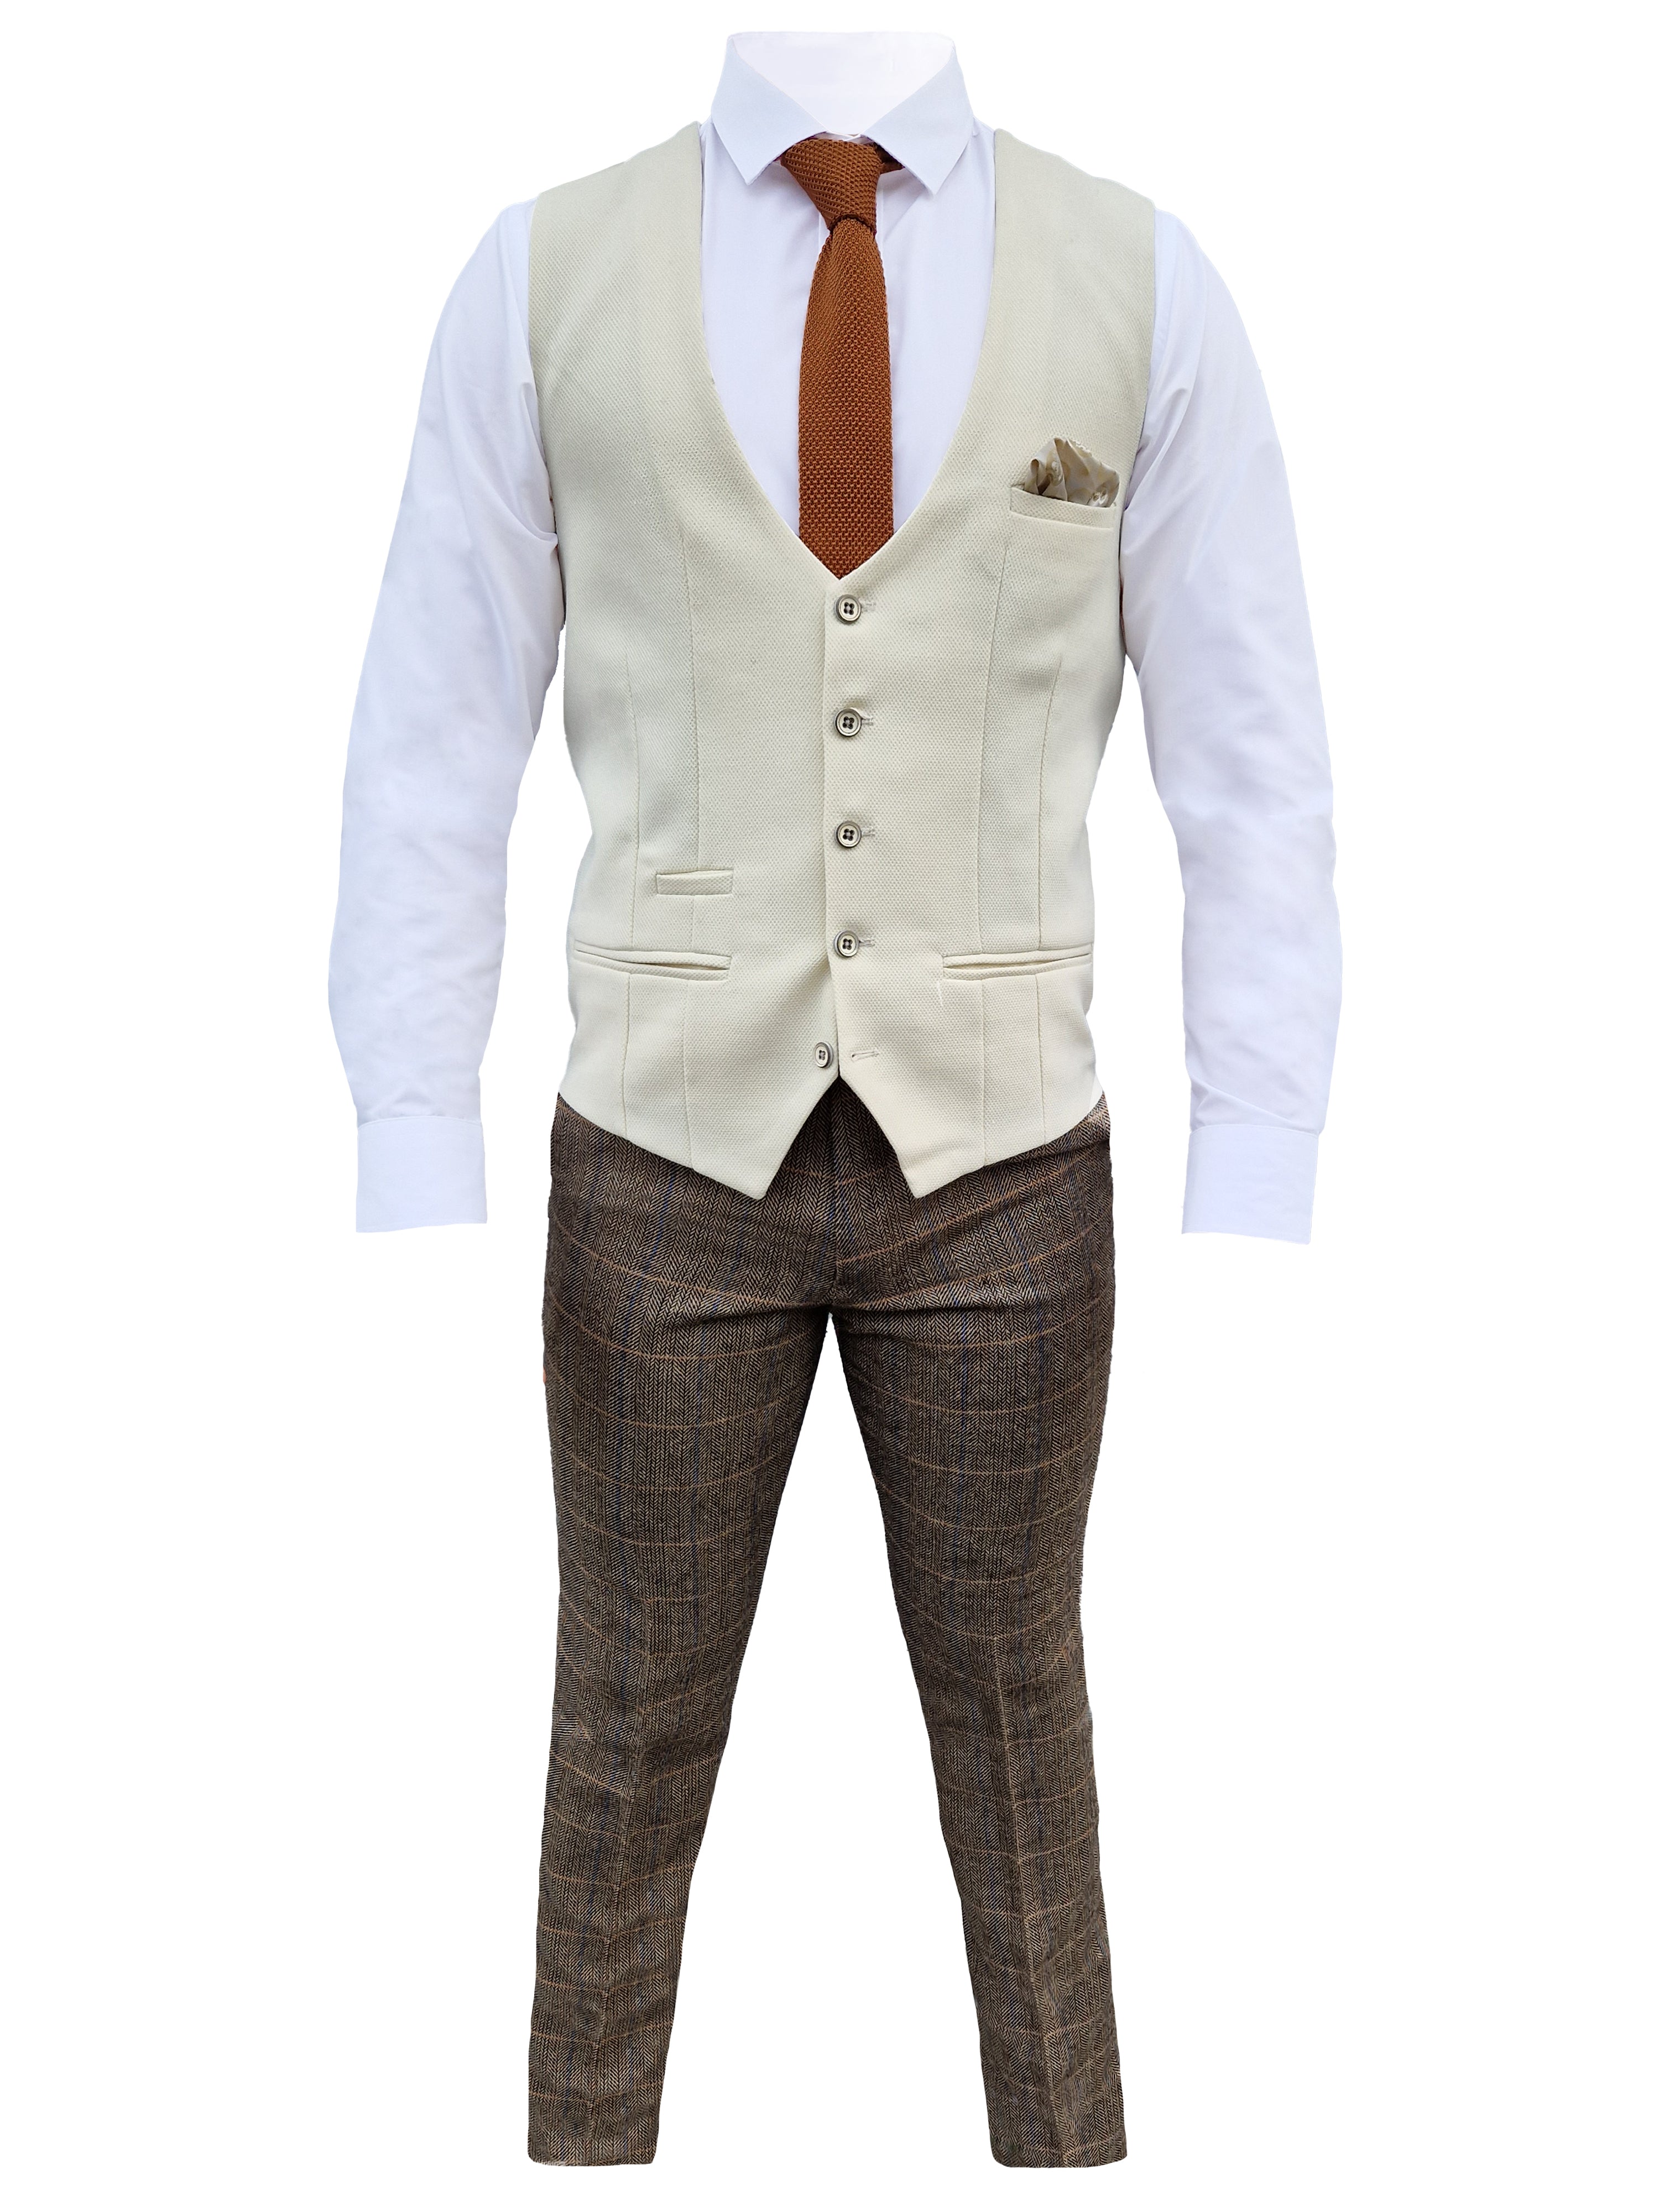 Mix and match - Costume pour hommes 3 pièces Herringbone